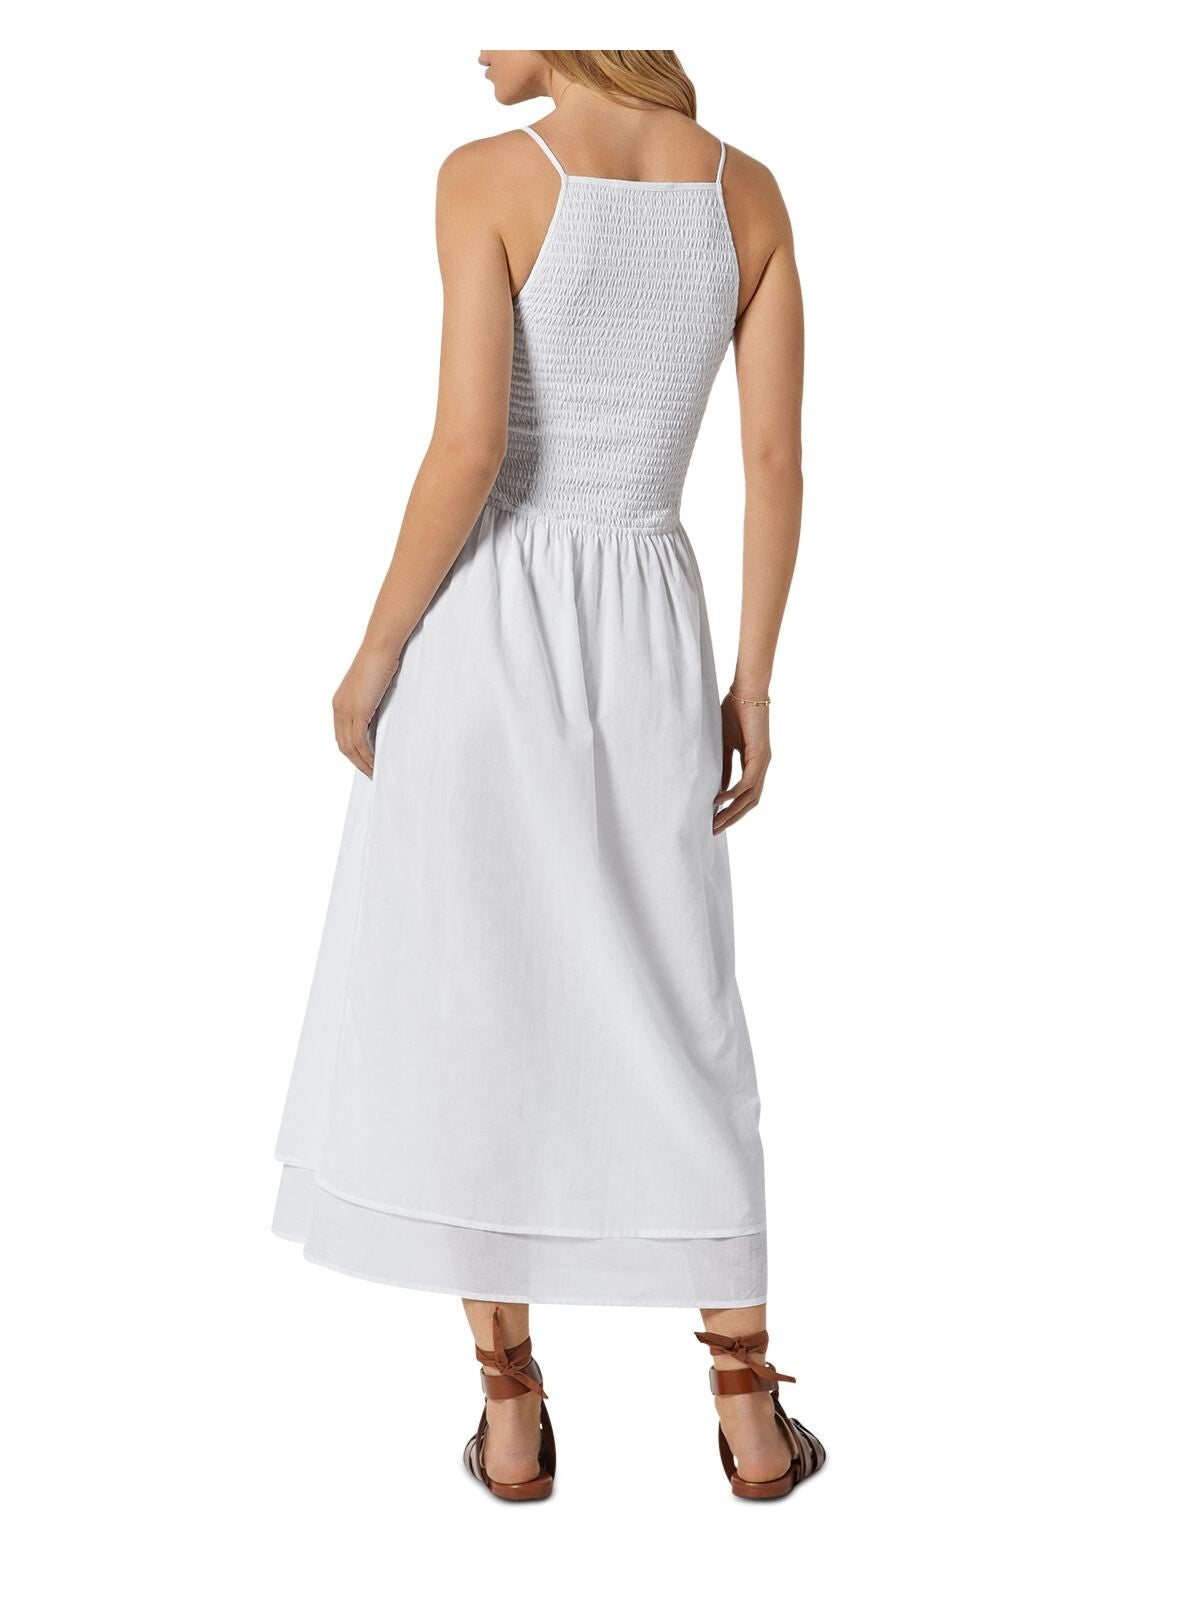 JOIE Womens White Smocked Pocketed Tiered Hem Pullover Sleeveless Square Neck Midi Fit + Flare Dress M